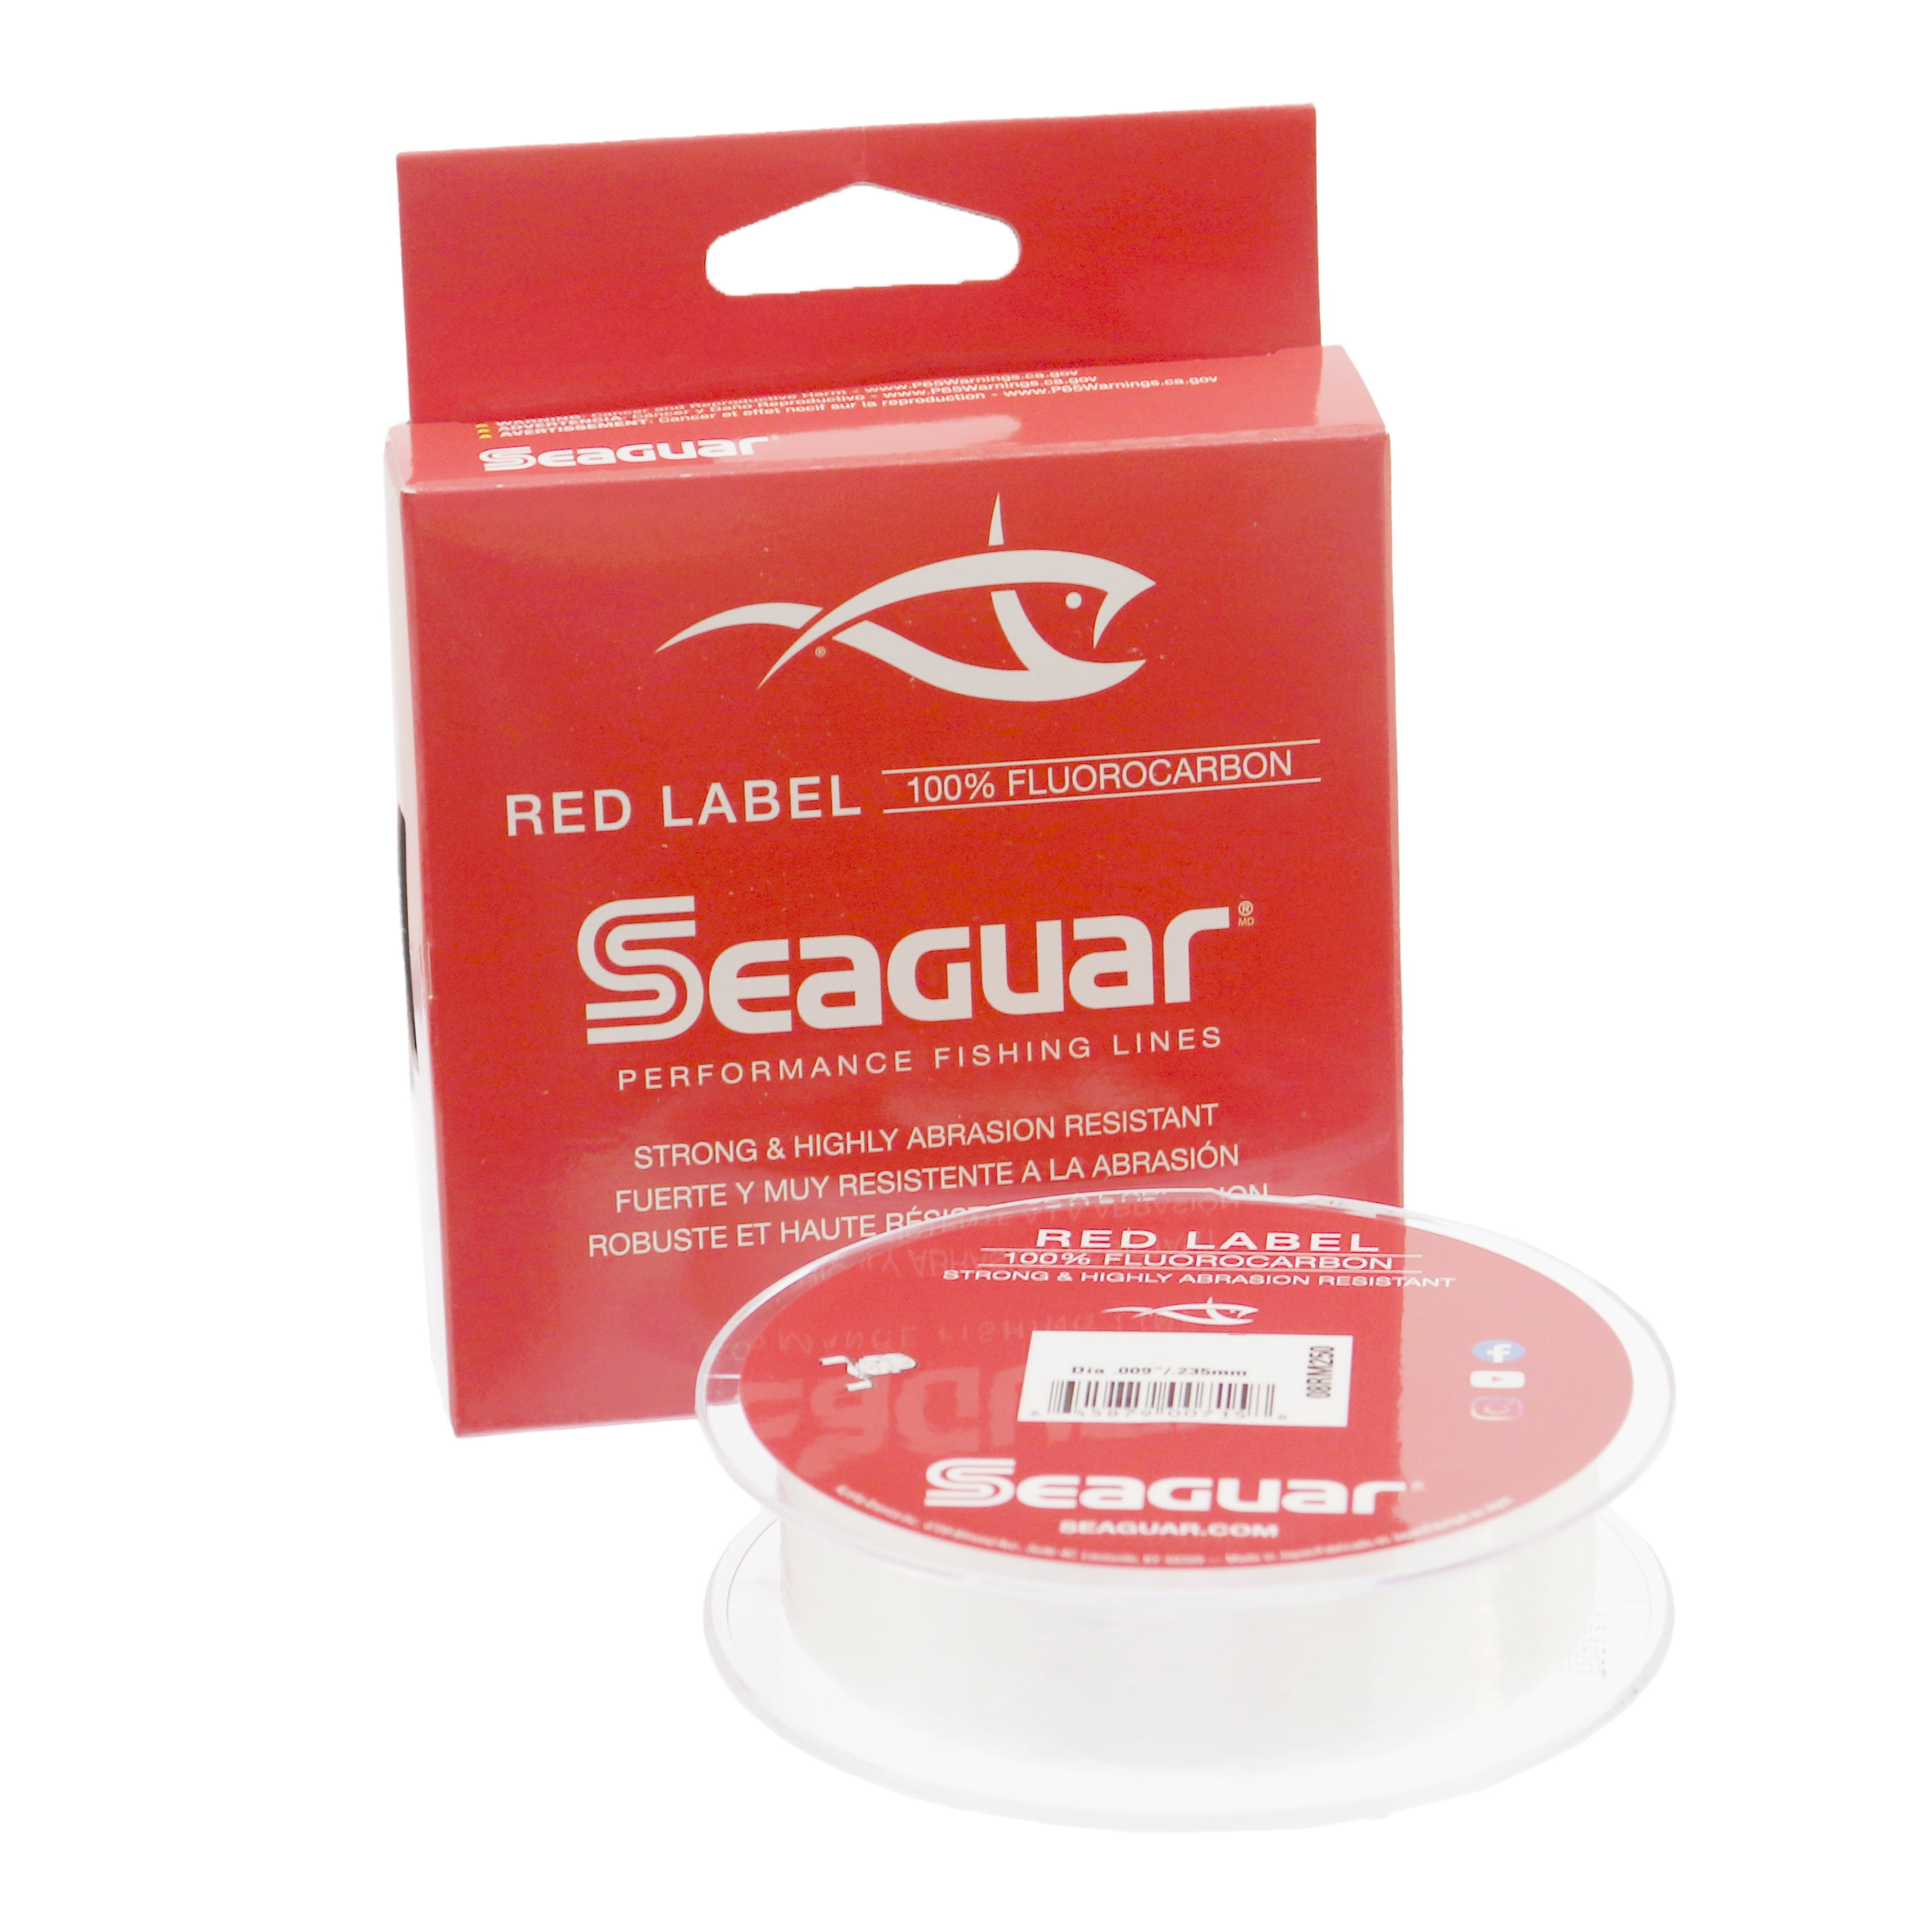 Seaguar Red Label 100% Fluorocarbon Fishing Line 10lbs, 200yds